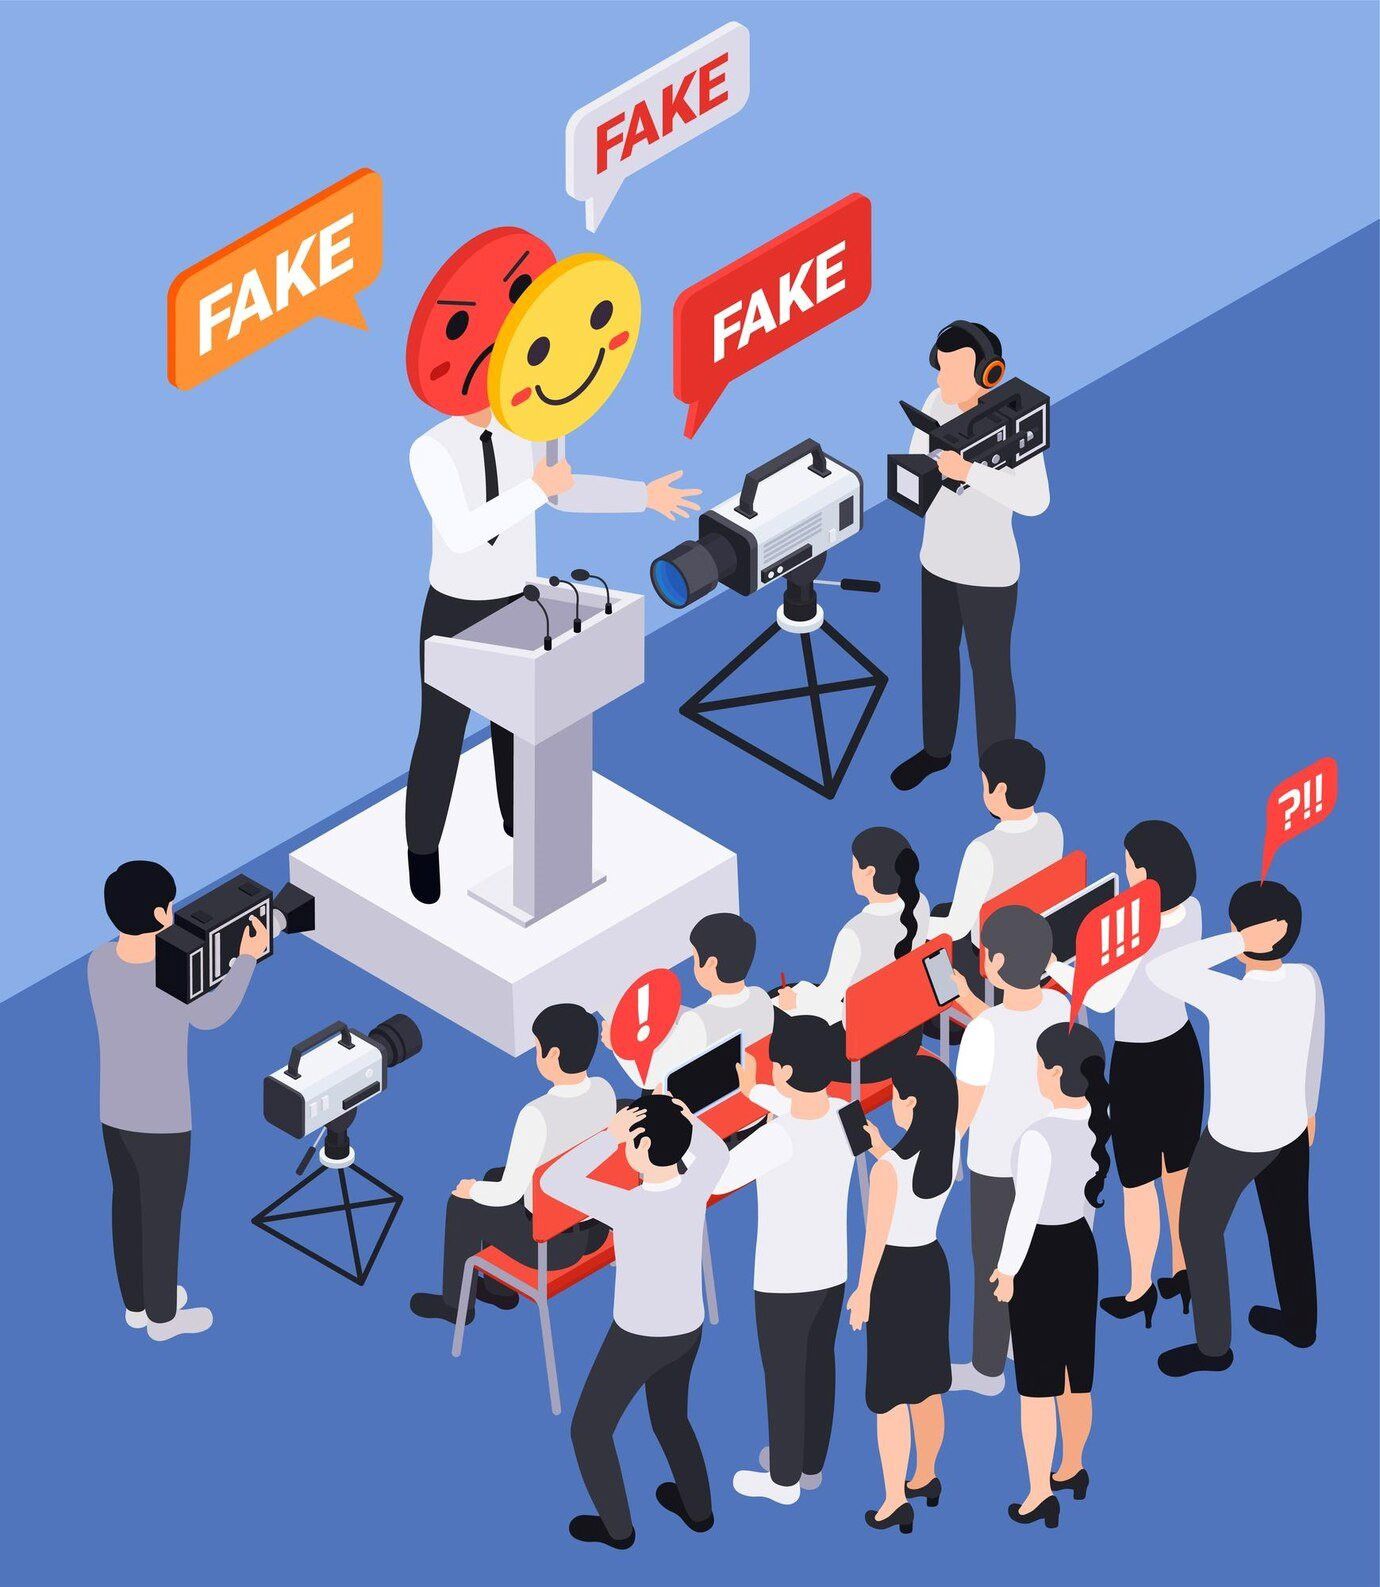 fake-news-disinformation-propaganda-isometric-composition-with-human-characters-thought-bubbles-person-speaking-from-tribune-vector-illustration_1284-77171.jpg